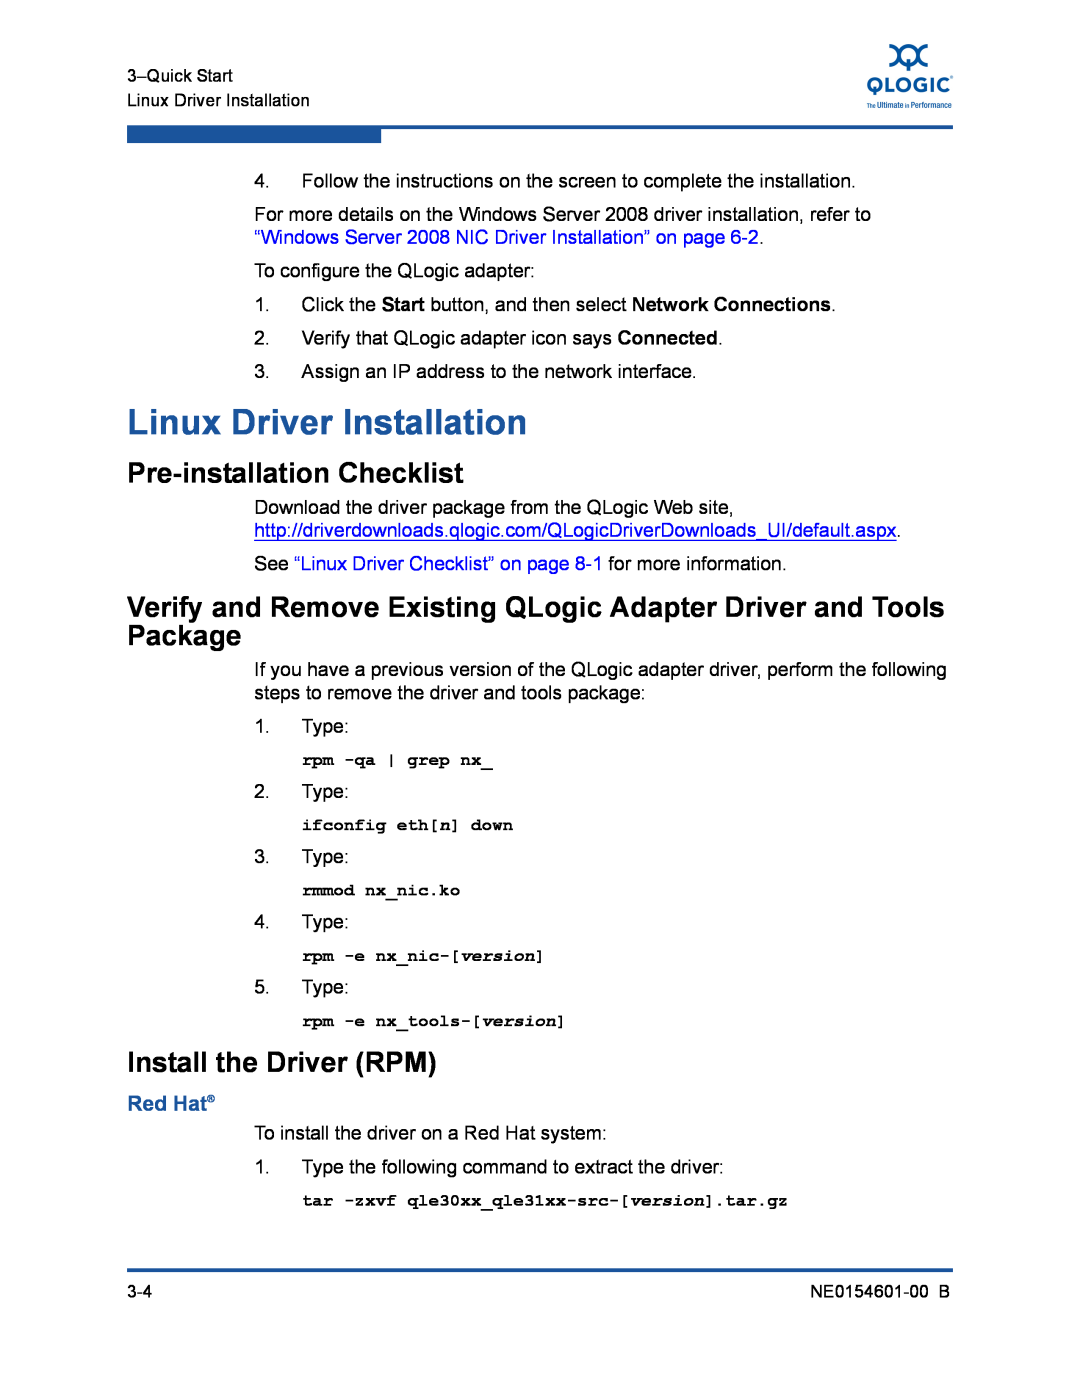 Q-Logic 3100, 3000 Linux Driver Installation, Verify and Remove Existing QLogic Adapter Driver and Tools Package, Red Hat 